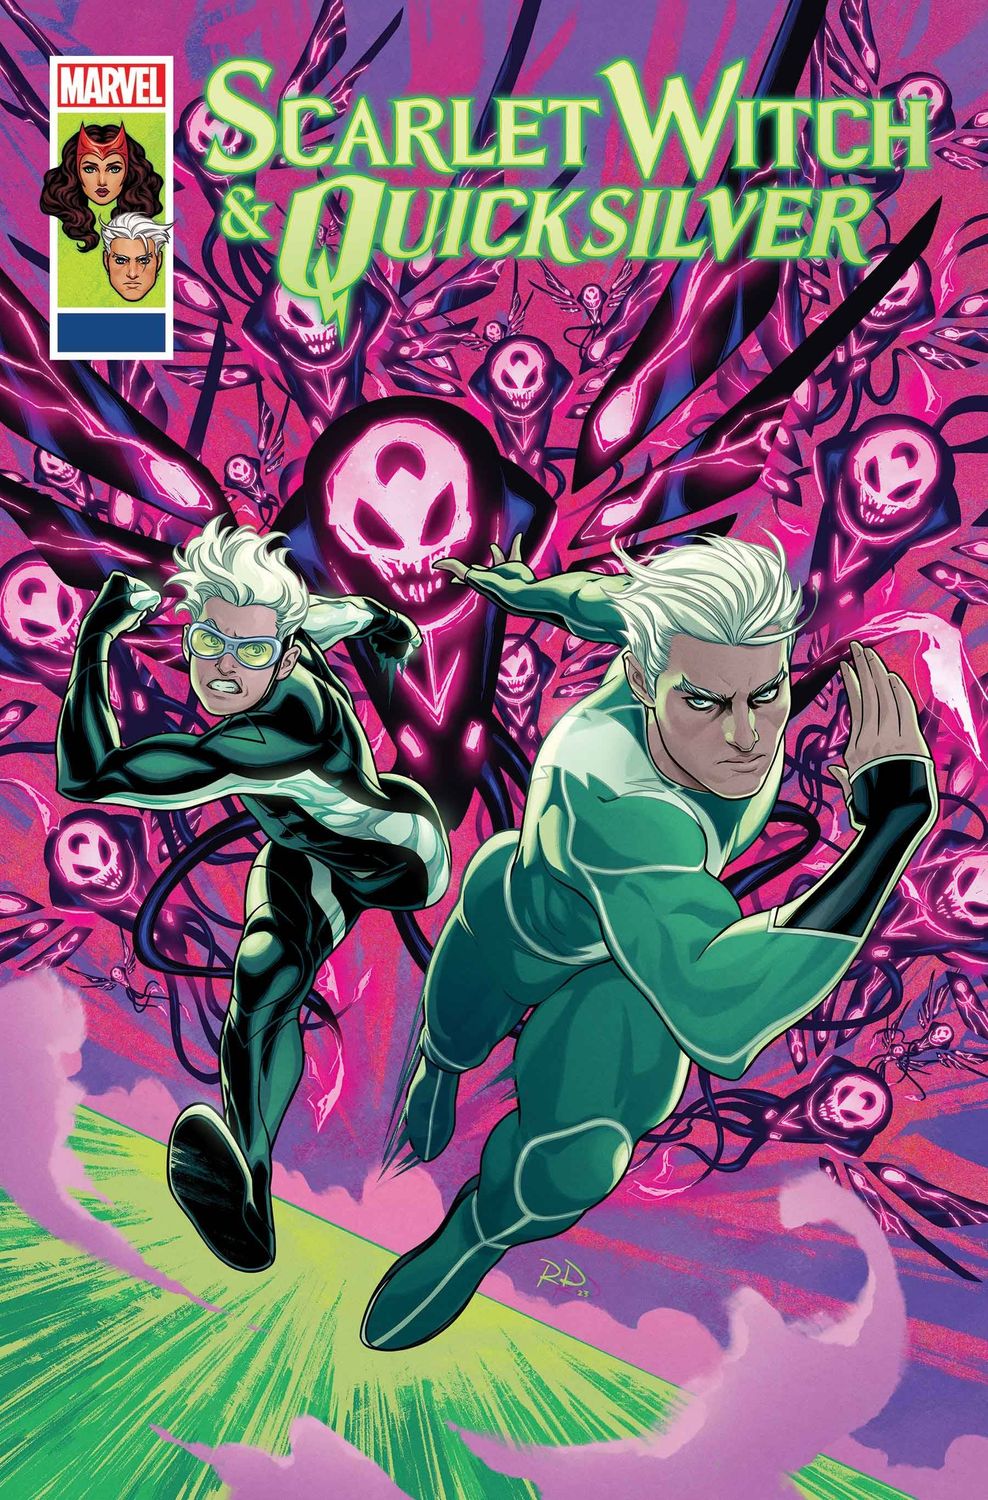 SCARLET WITCH AND QUICKSILVER #3
MARVEL COMICS
(24th April 2024)